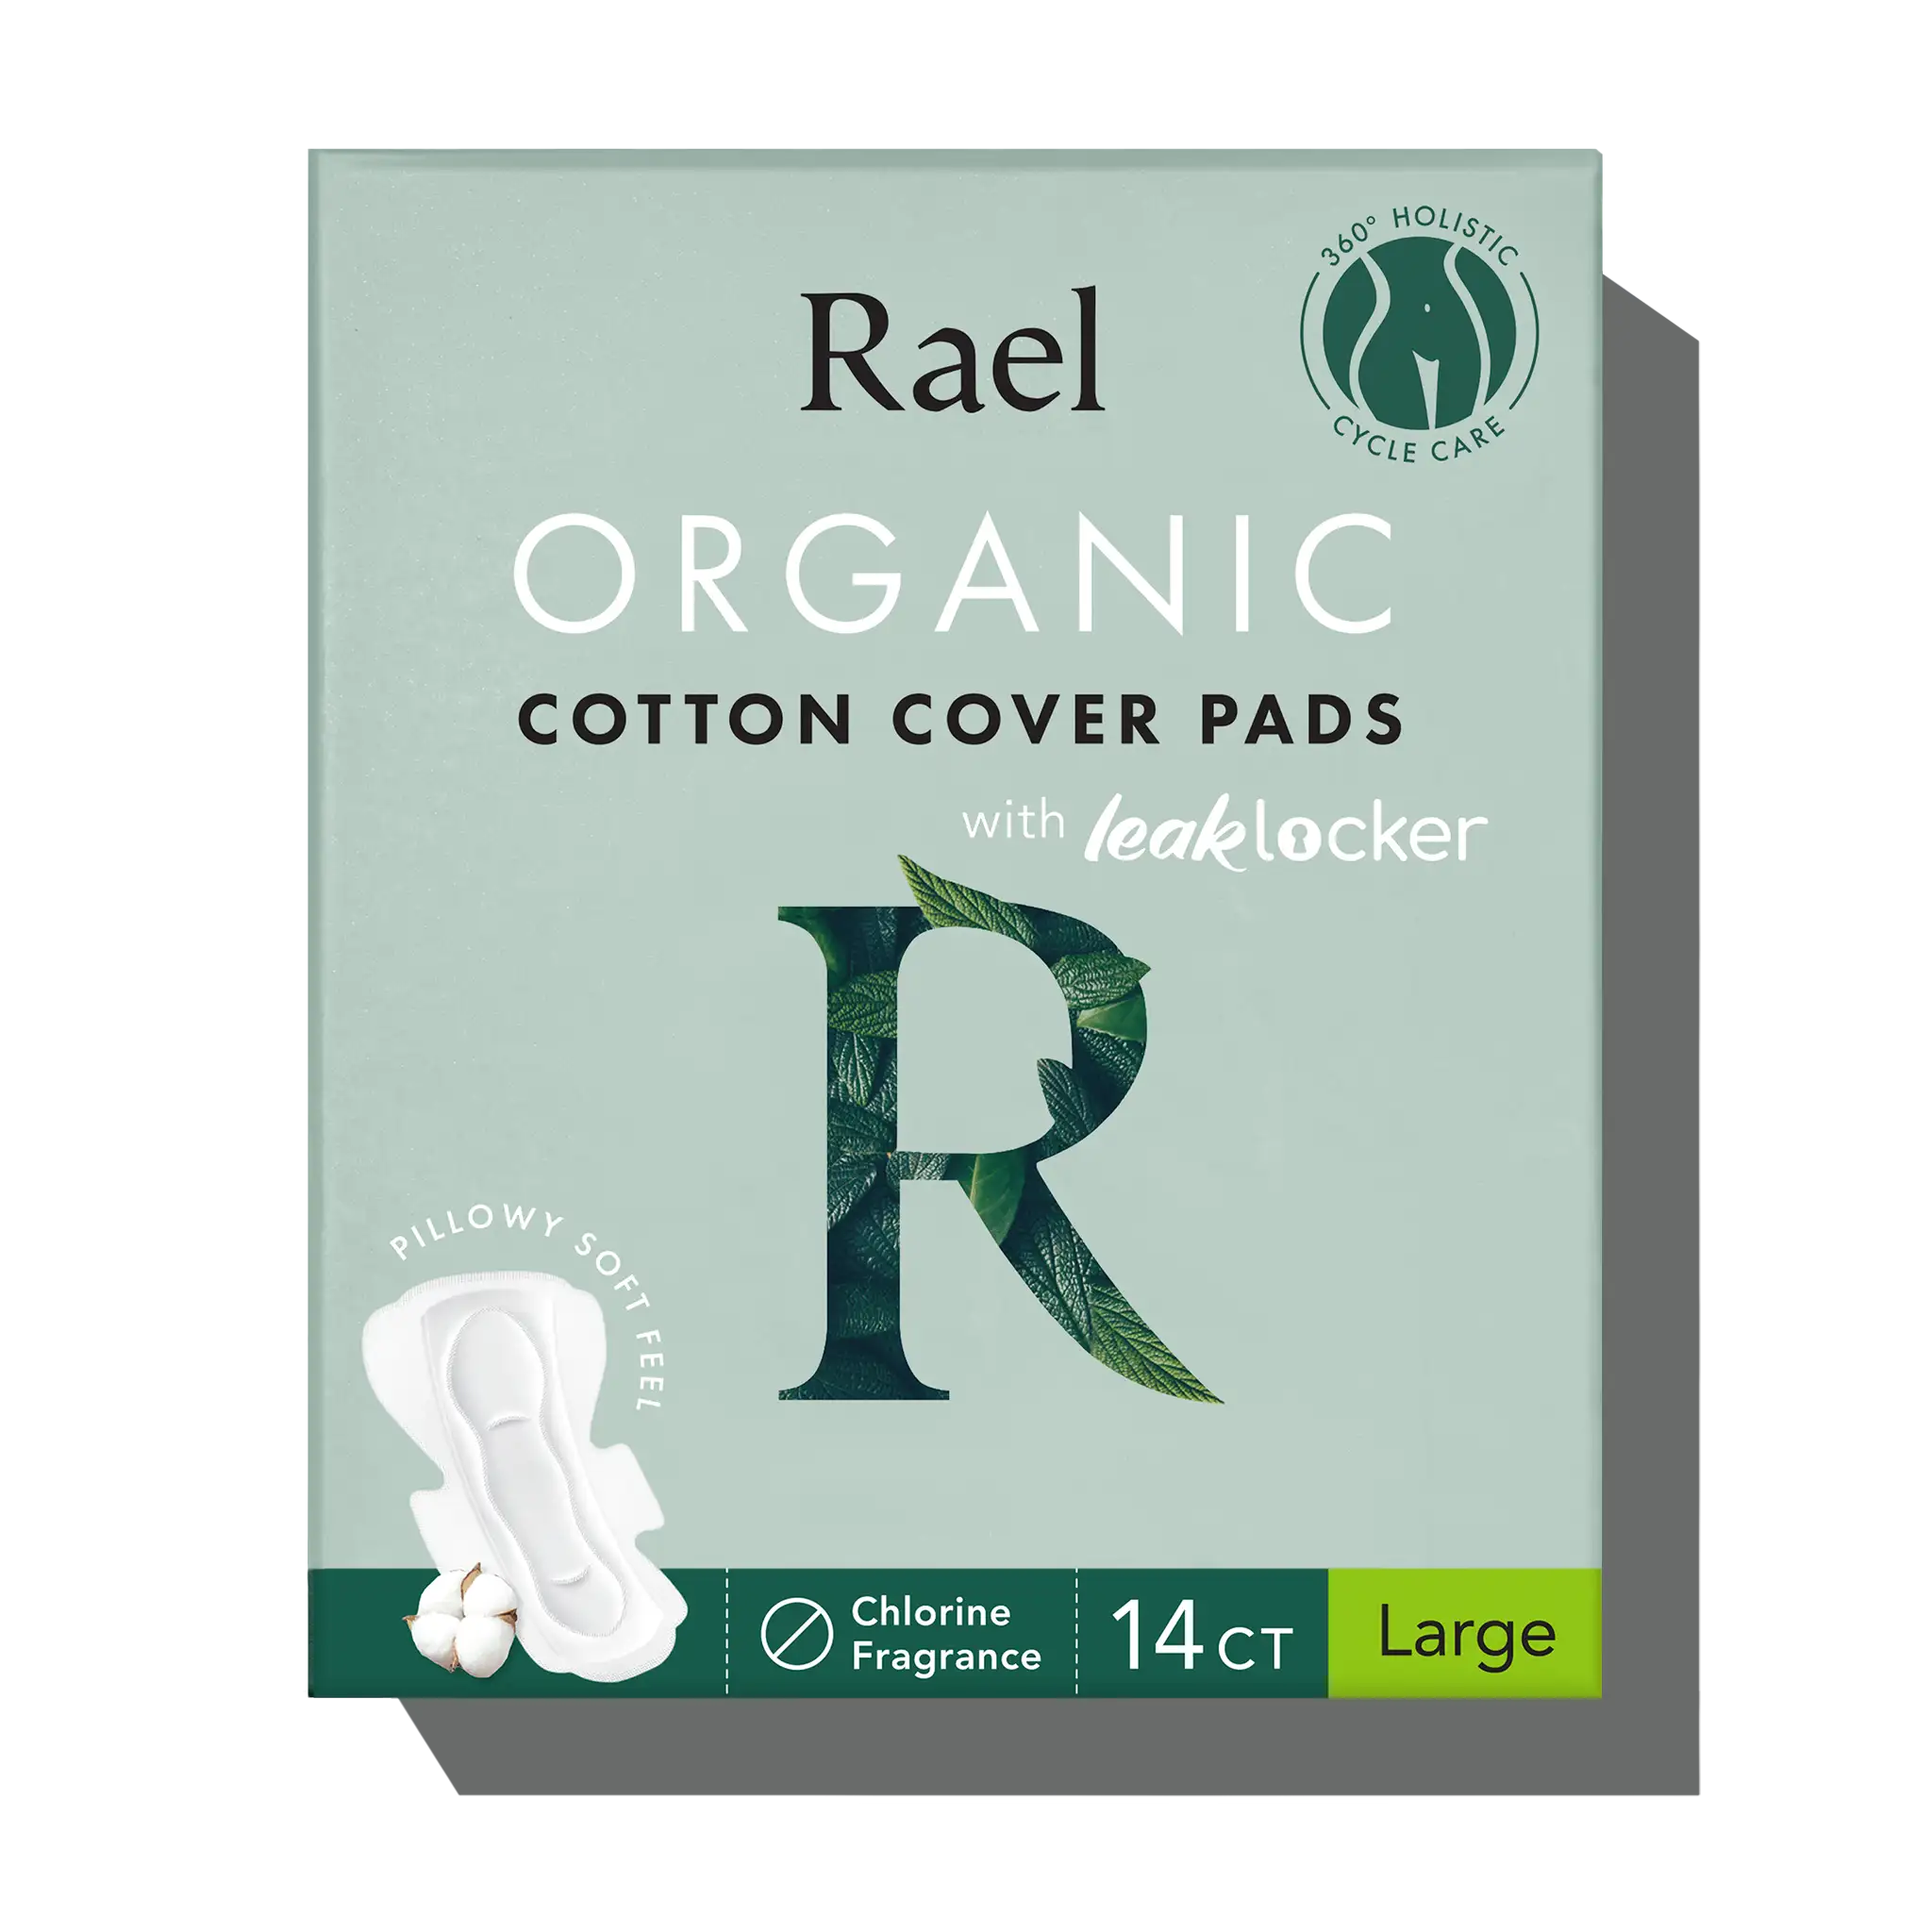 NEW Rael Lot of (2) Organic Cotton Cover Period Underwear Size L